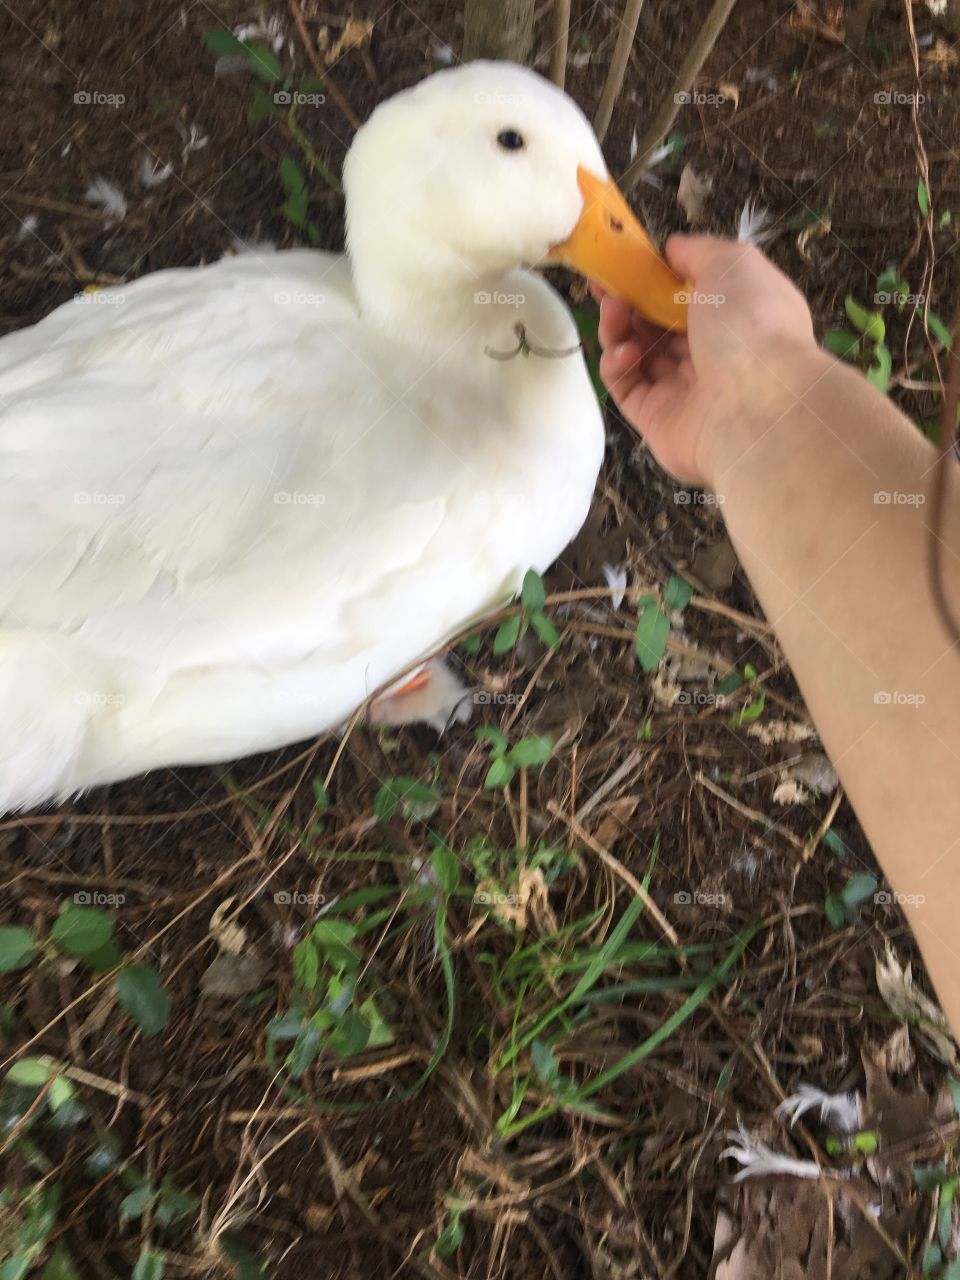 A sweet female duck cuddles up to her favorite human